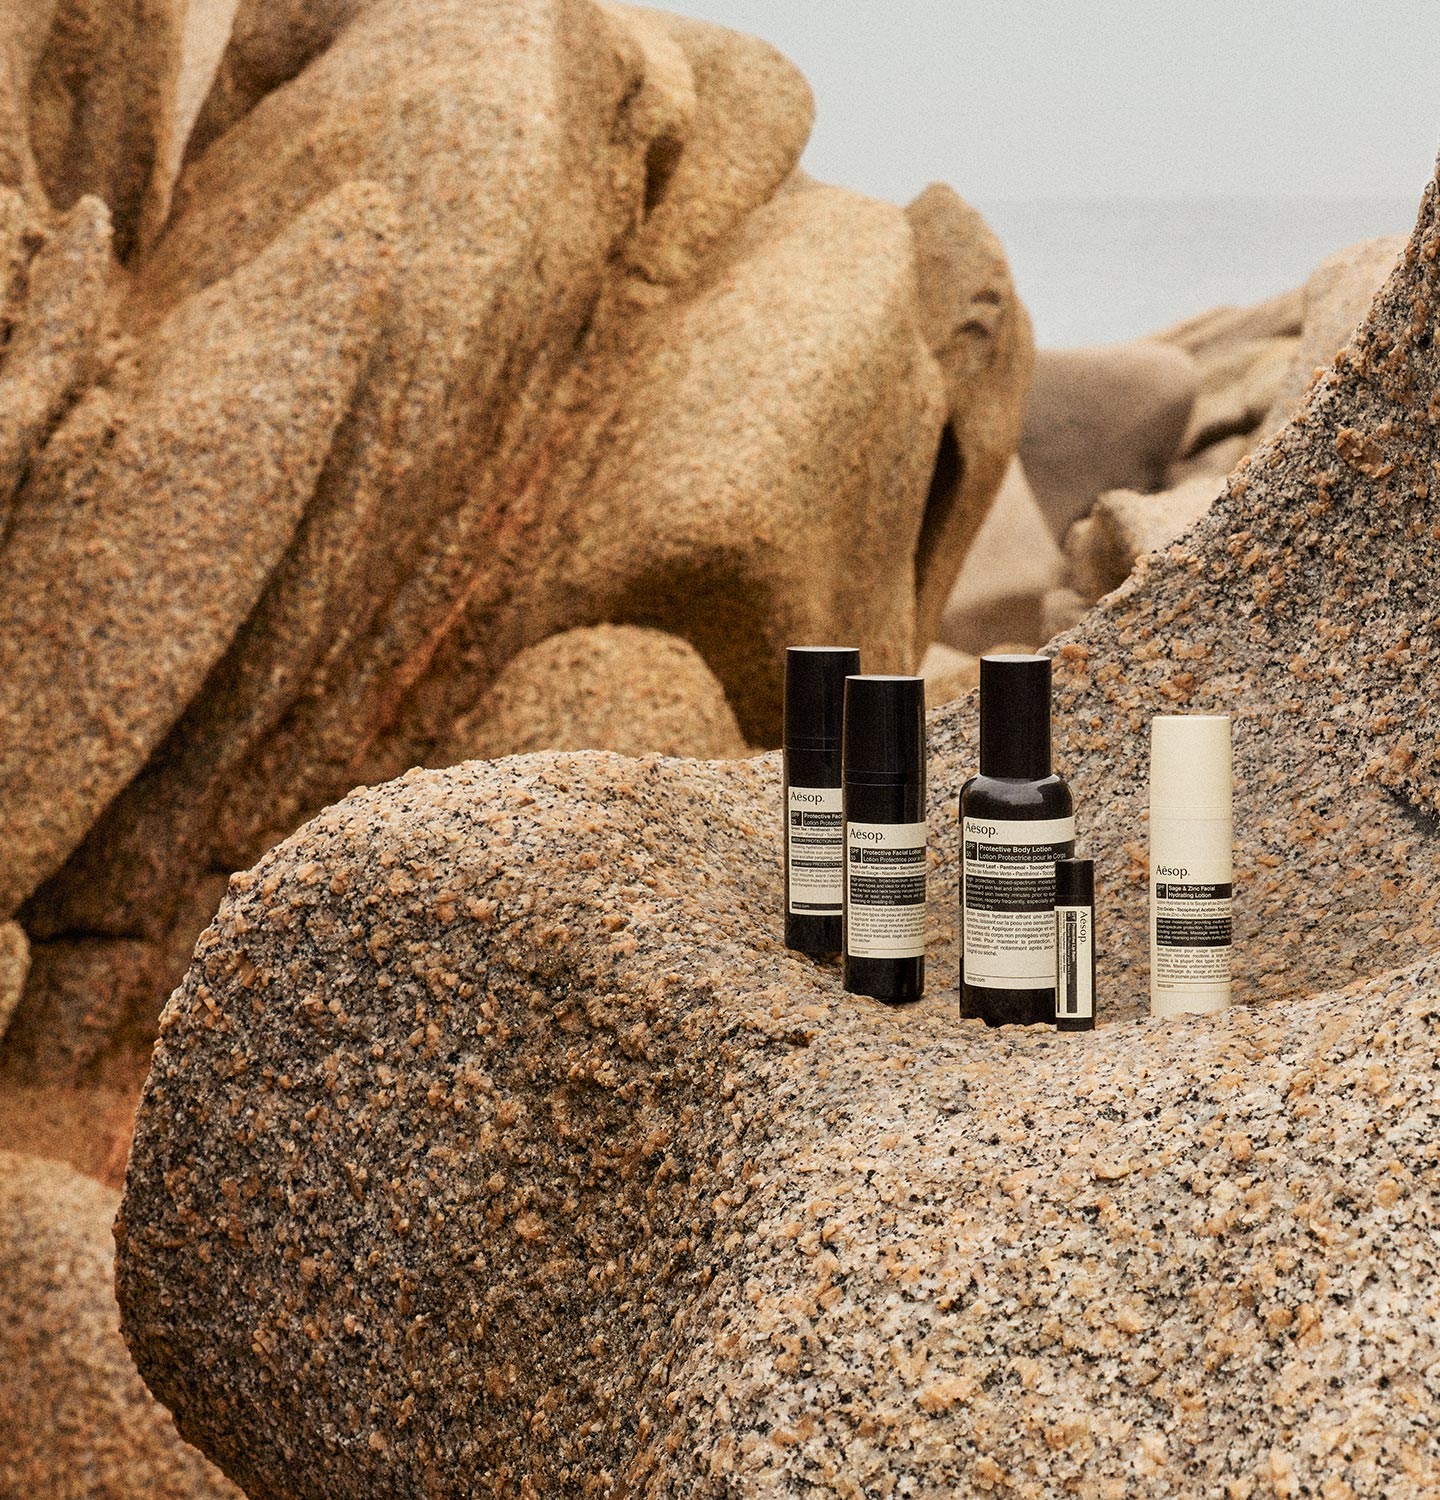 Aesop Sun Care products